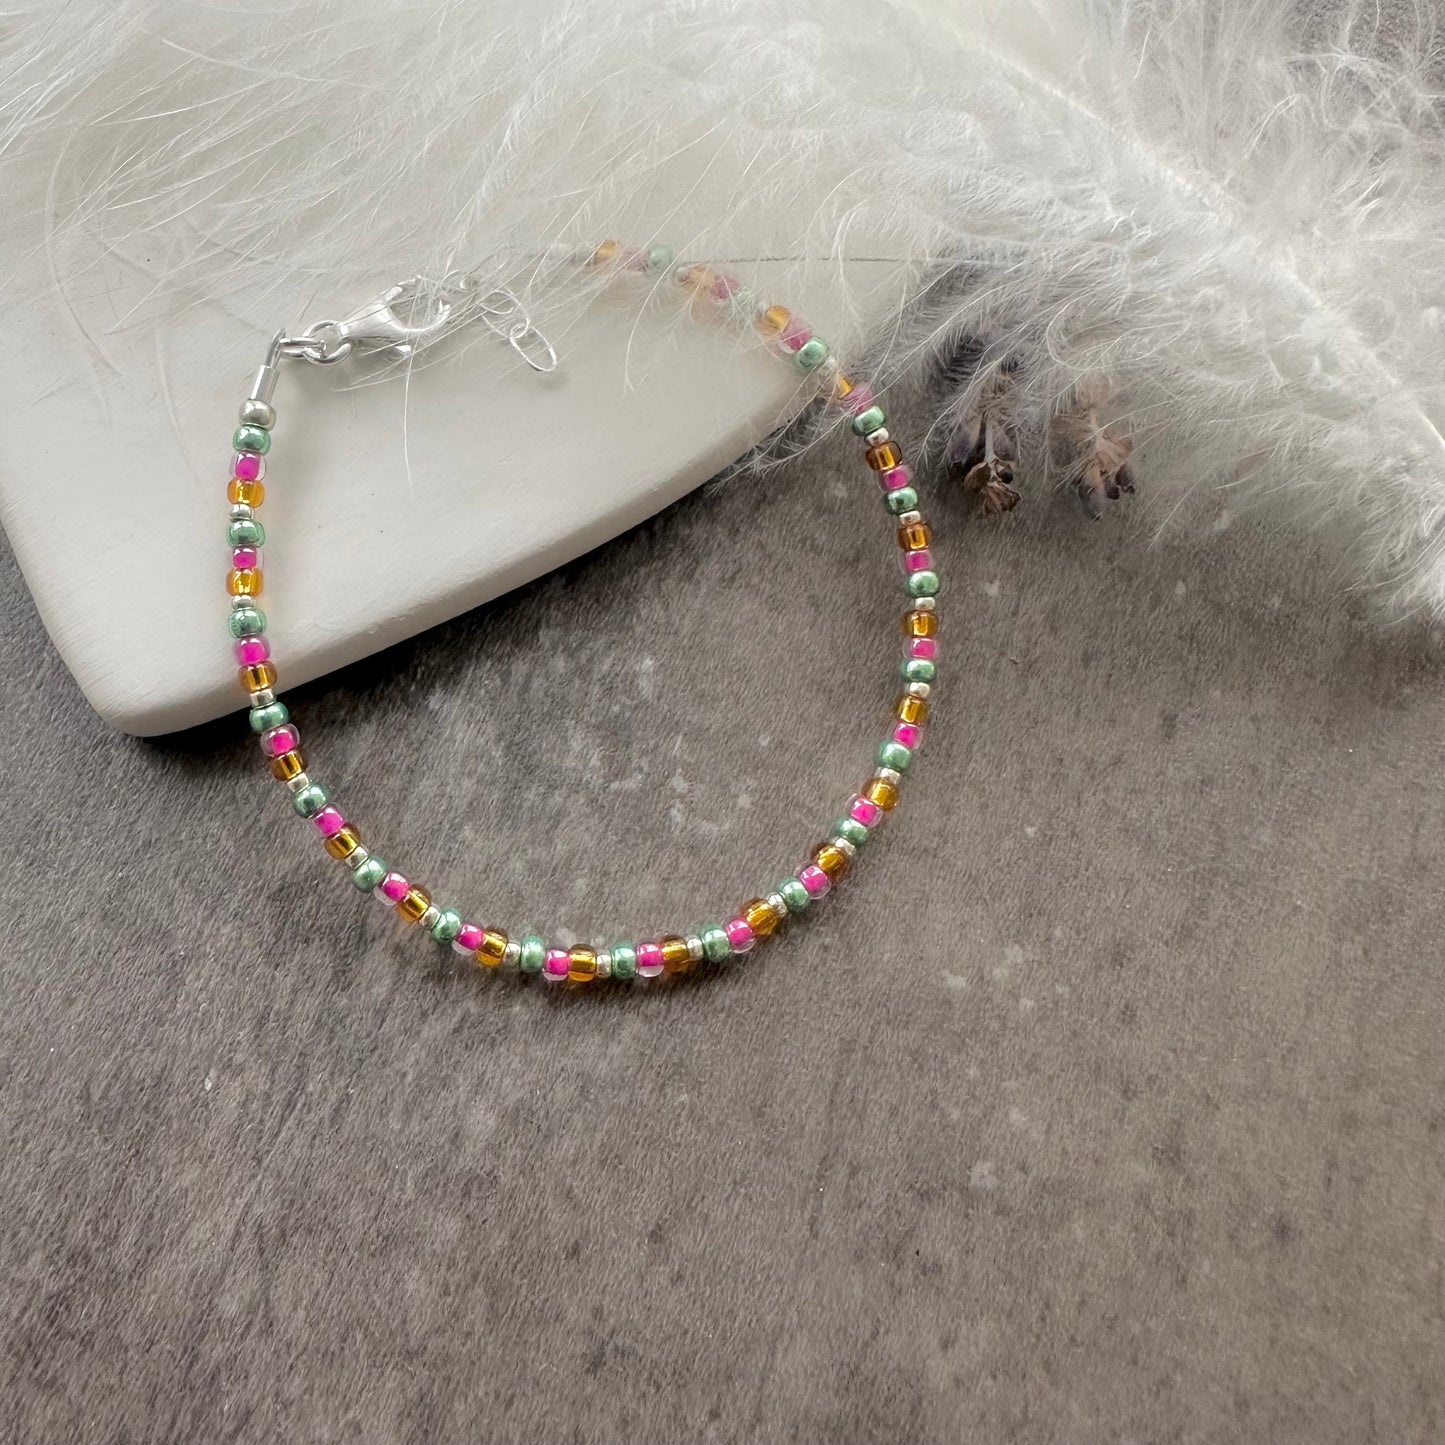 Thin pink orange green Bracelet with seed beads